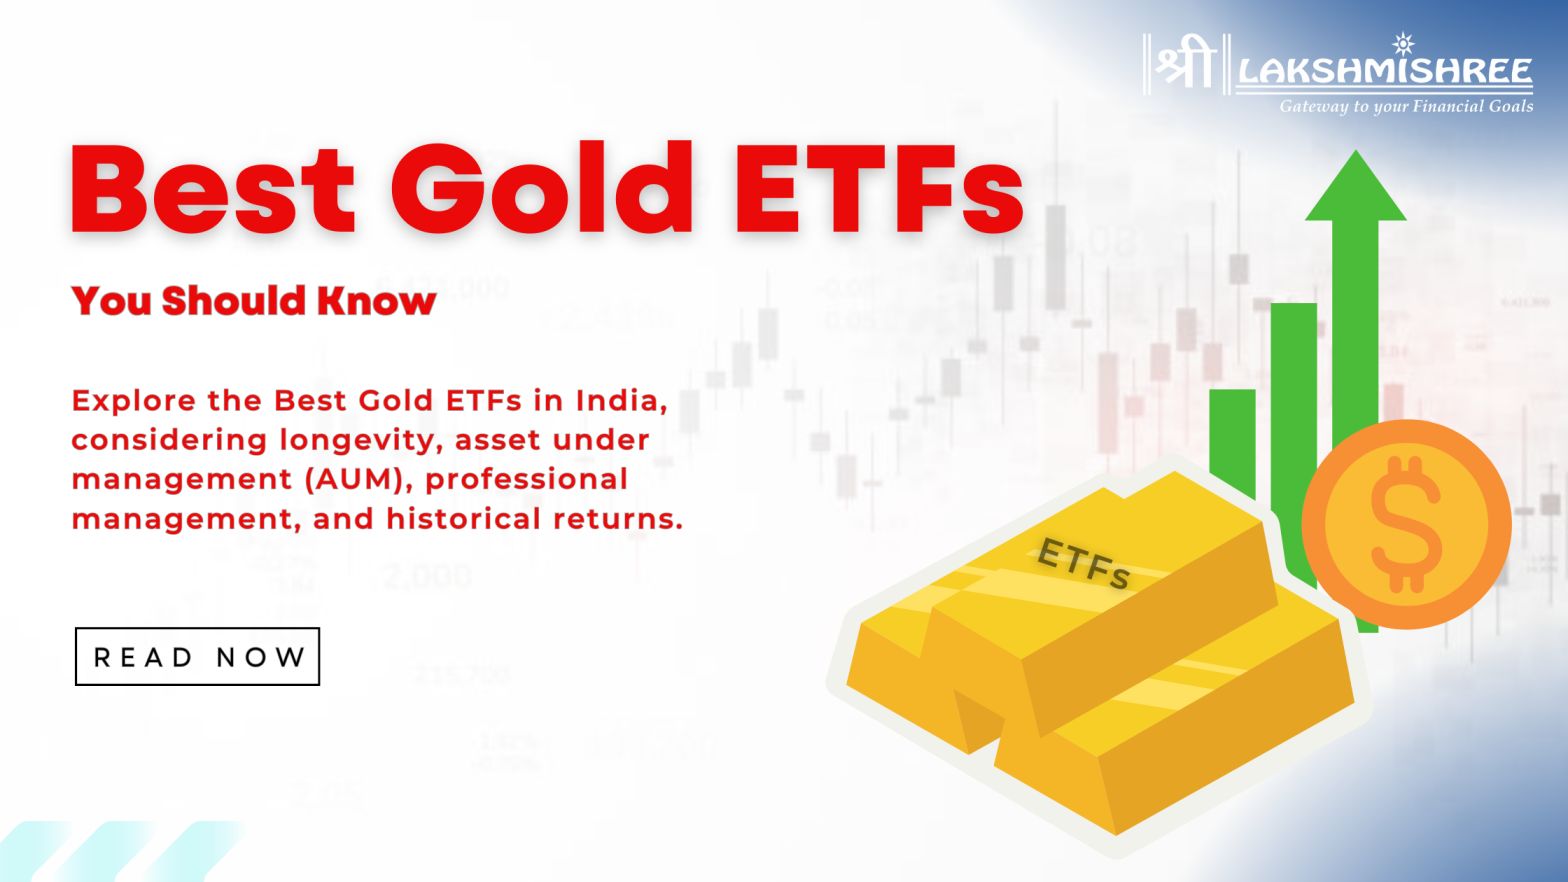 Best Gold ETFs in India for Investment: You Should Know